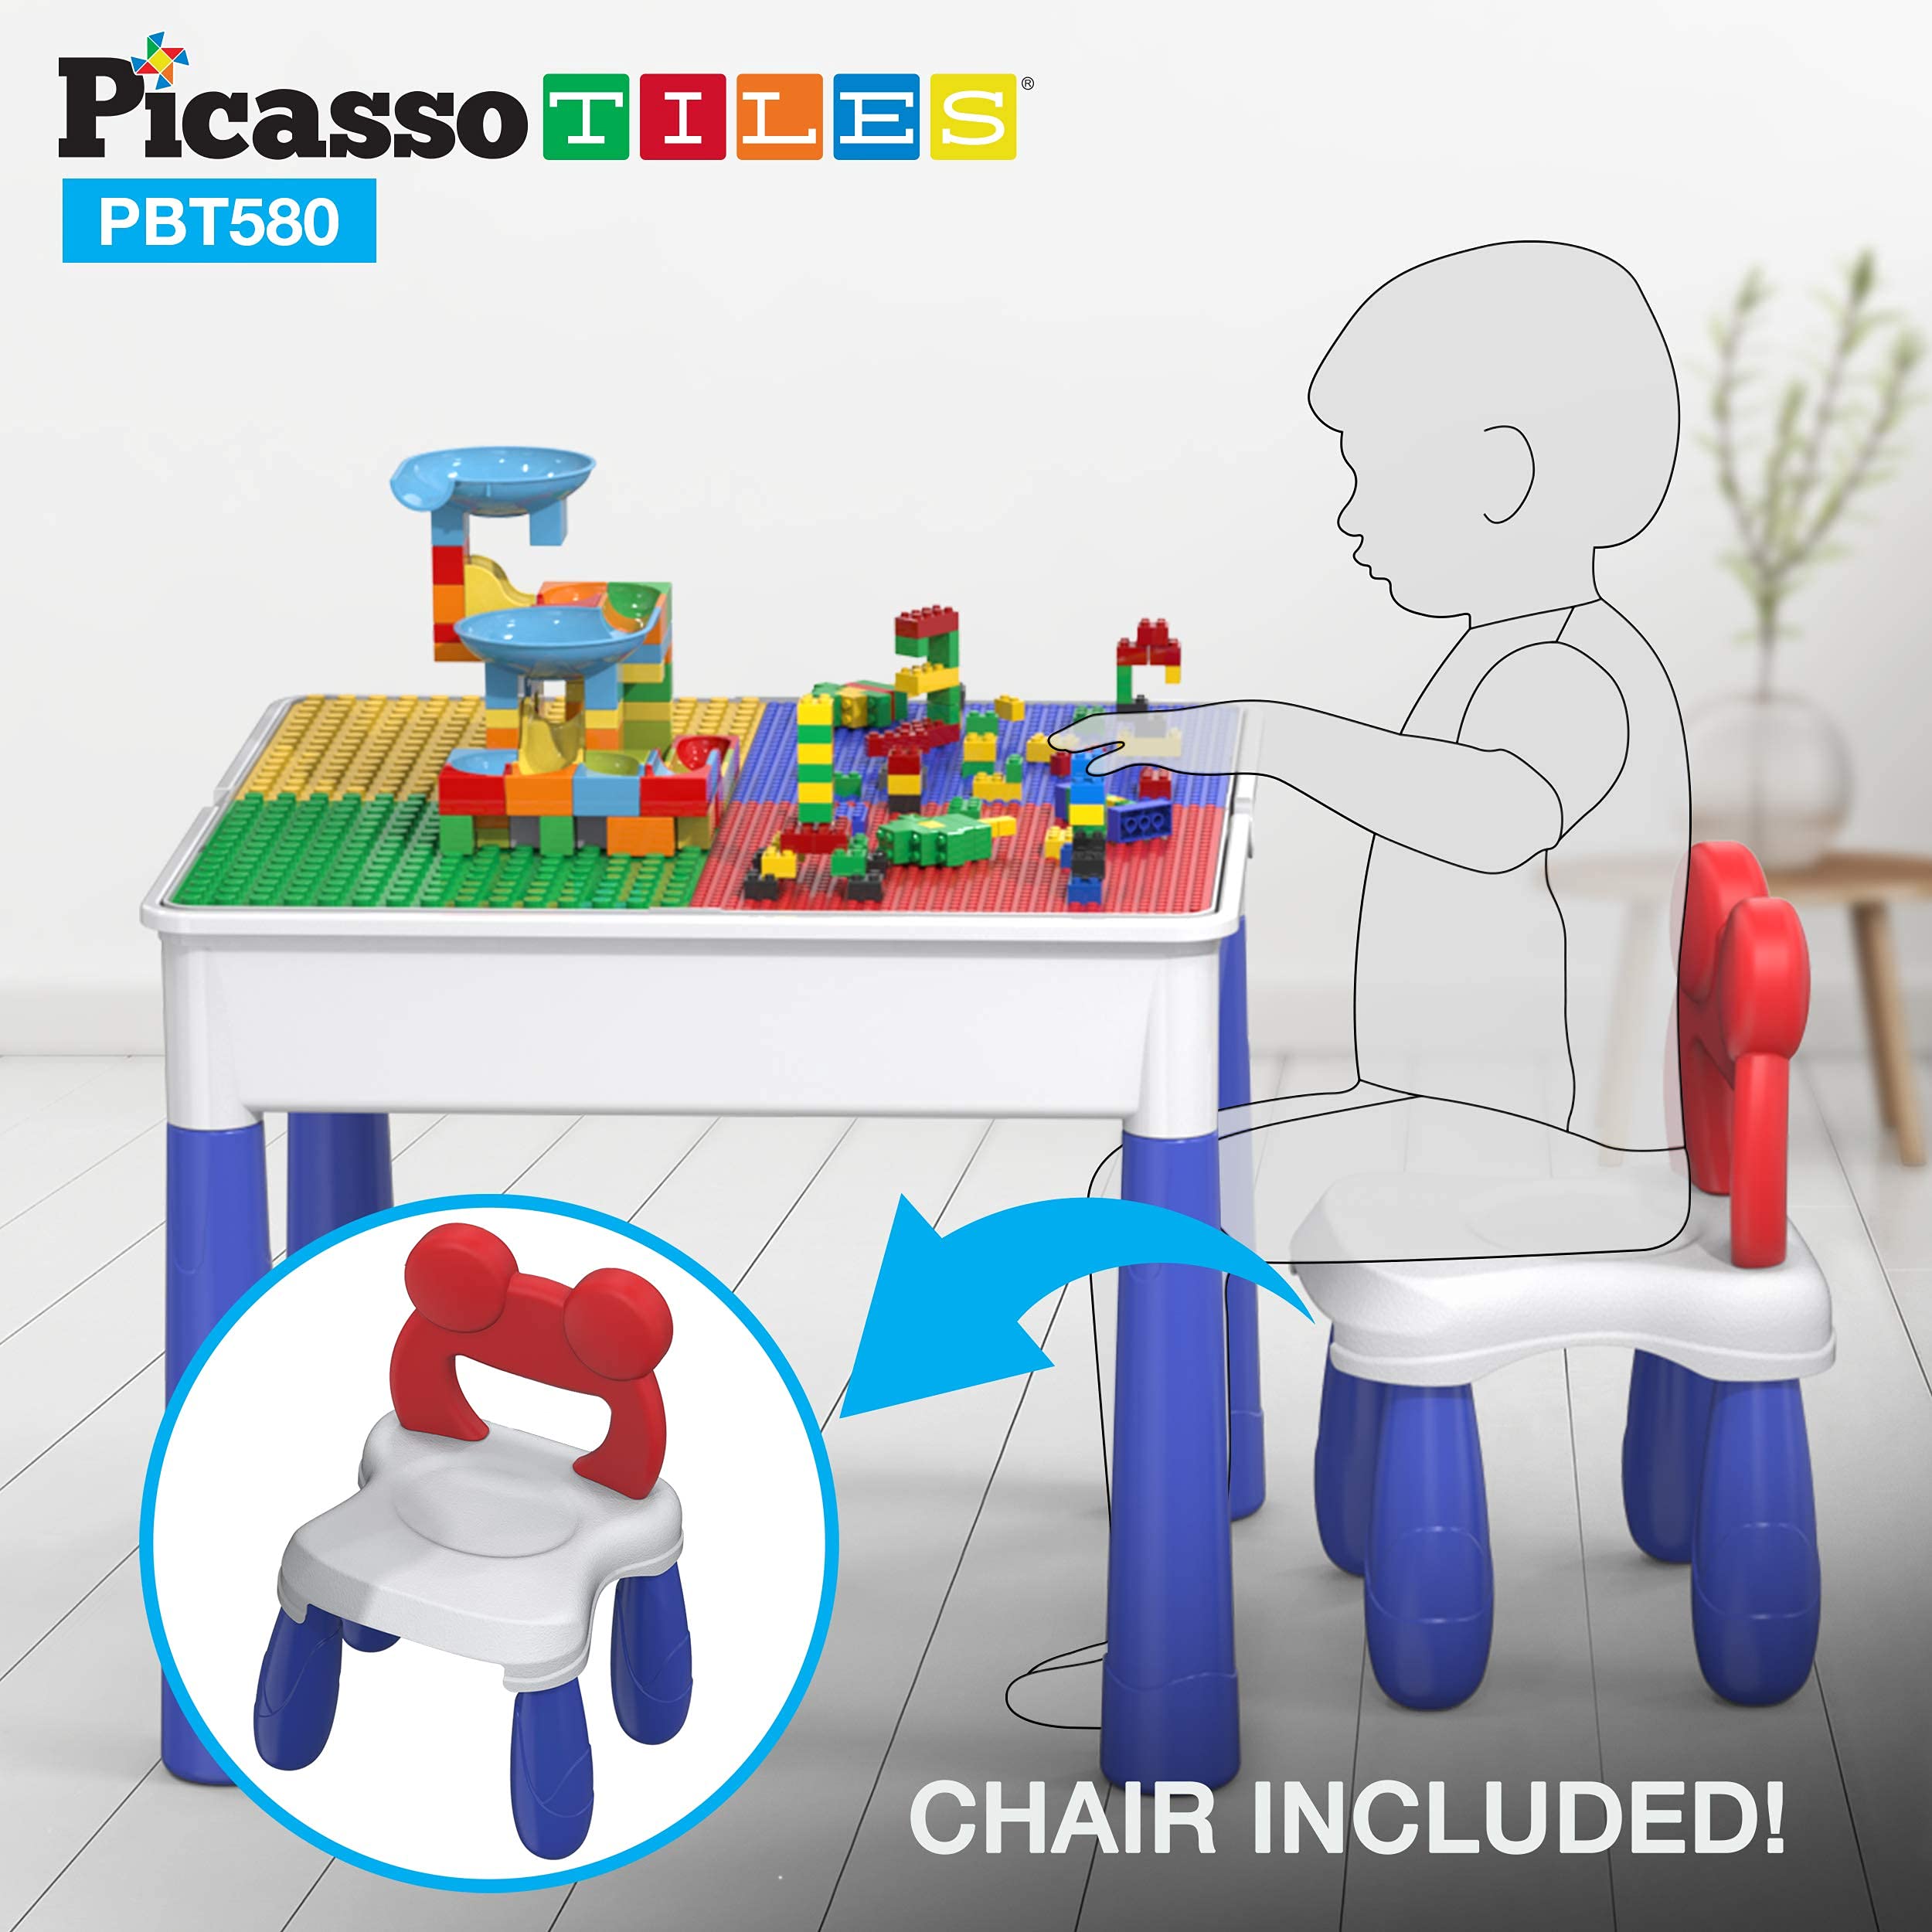 PicassoTiles Magnetic Drawing Board + Table Chair Set with Storage, 12x10 inch Large 748 Bead Magnet Tablet Pad Erasable Reusable Writing Playboard, 581pcs All-in-1 Building Blocks and Marble Run